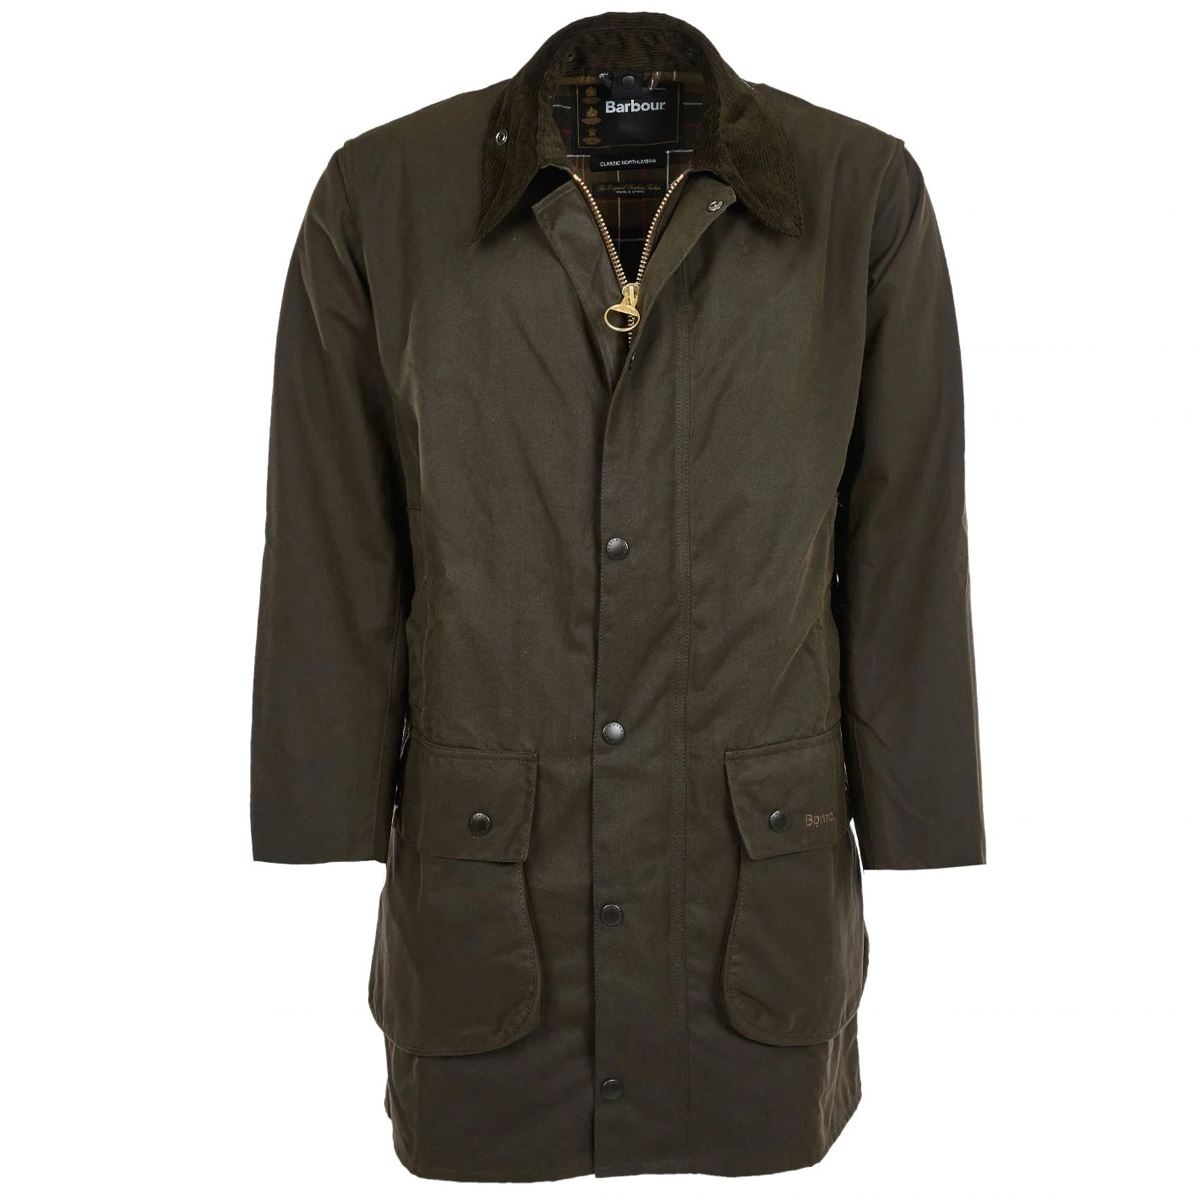 Which hood is compatible with the Barbour Northumbria Wax Jacket?